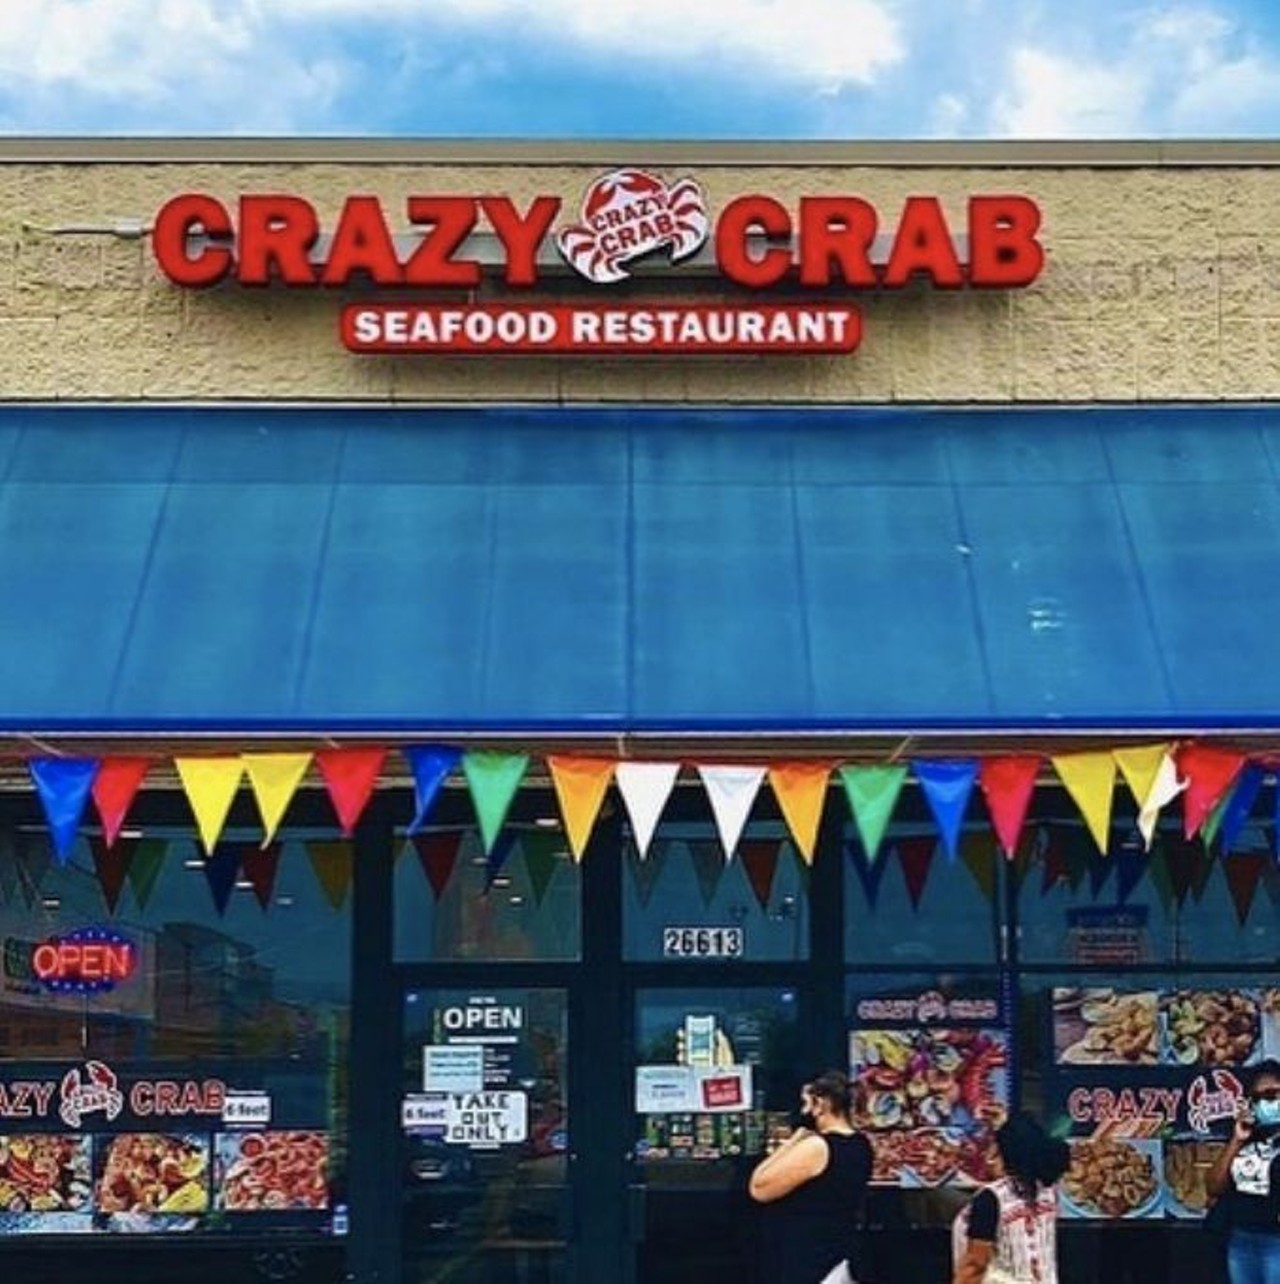 Crazy Crab Ypsilanti
2800 Washtenaw Ave., Ypsilanti; 248-681-3200; crazycrabypsilanti.com
This Ypsilanti spot offers a variety of fried seafood baskets and a selection of &#147;crazy seafood combos,&#148; all of which include corn, hard-boiled egg, and potatoes and can be customized with sauce options and spice levels. 
Photo via Crazy Crab Ypsilanti/Facebook